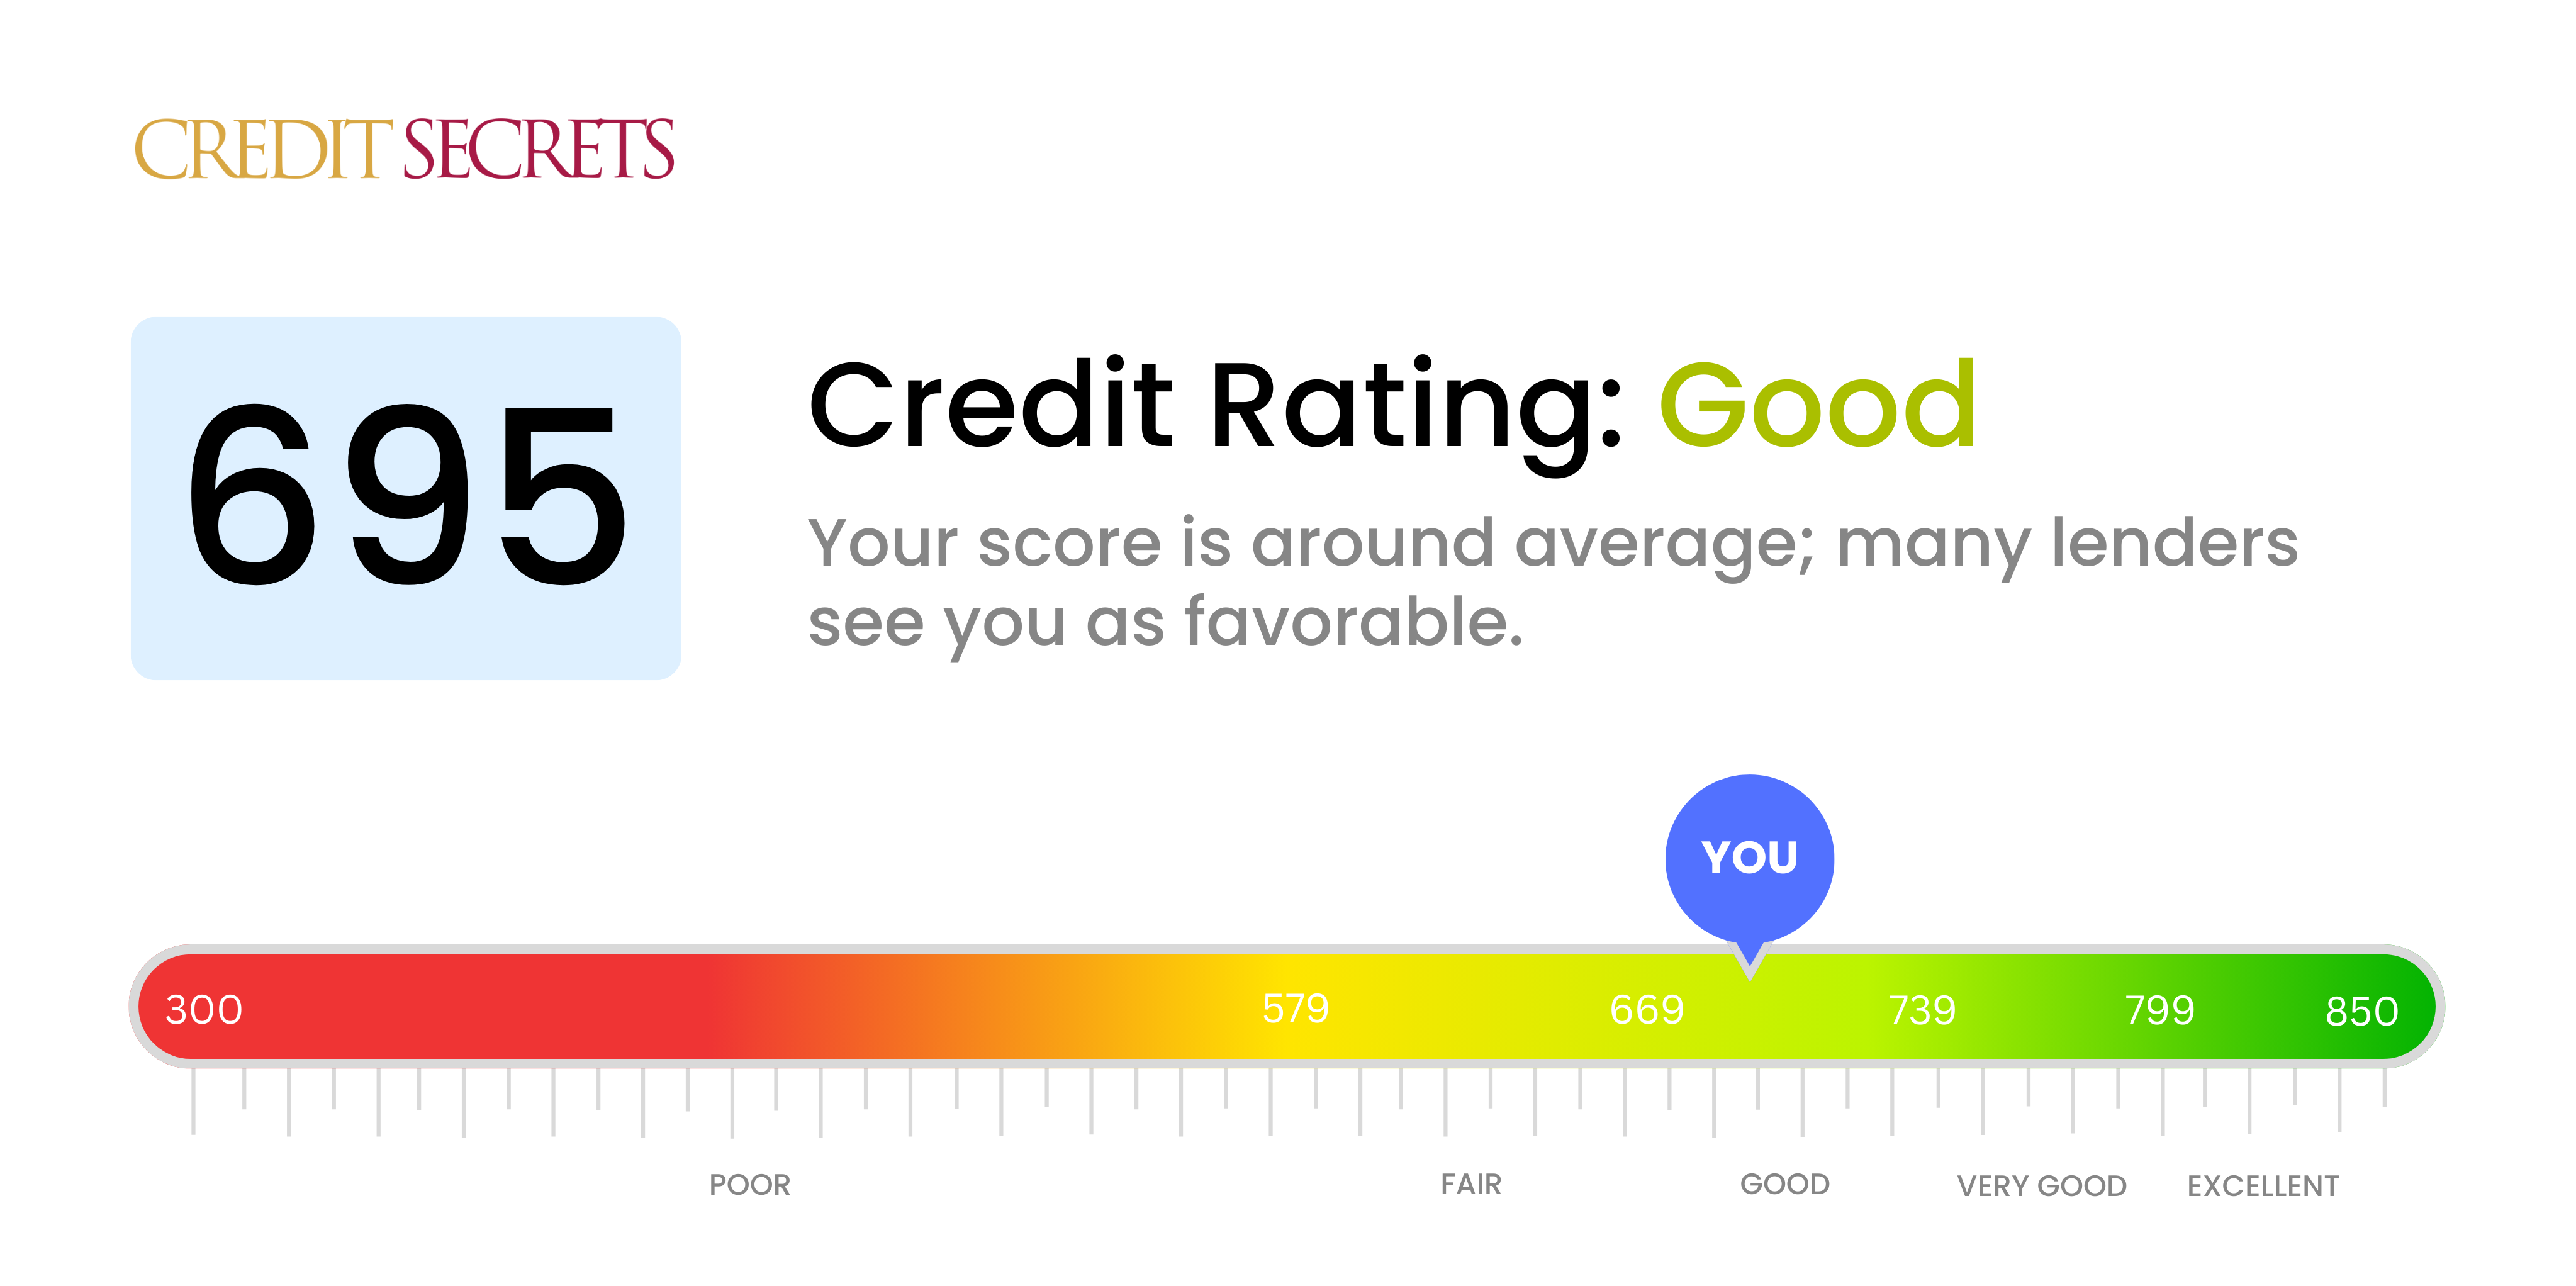 Is 695 a good credit score?